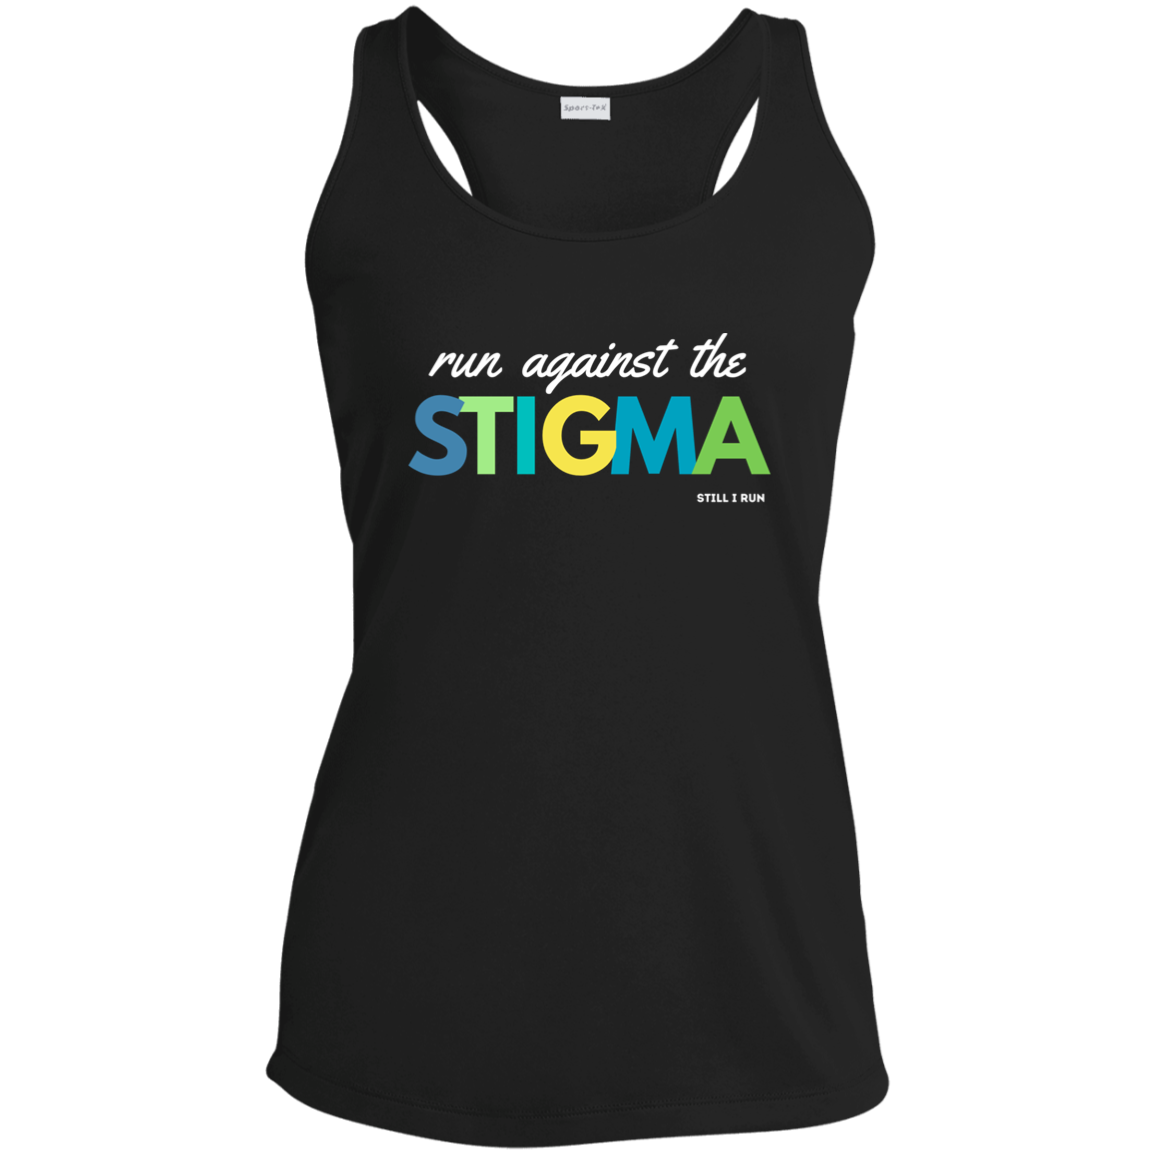 Run Against the Stigma - Fitted Performance Racerback Tank